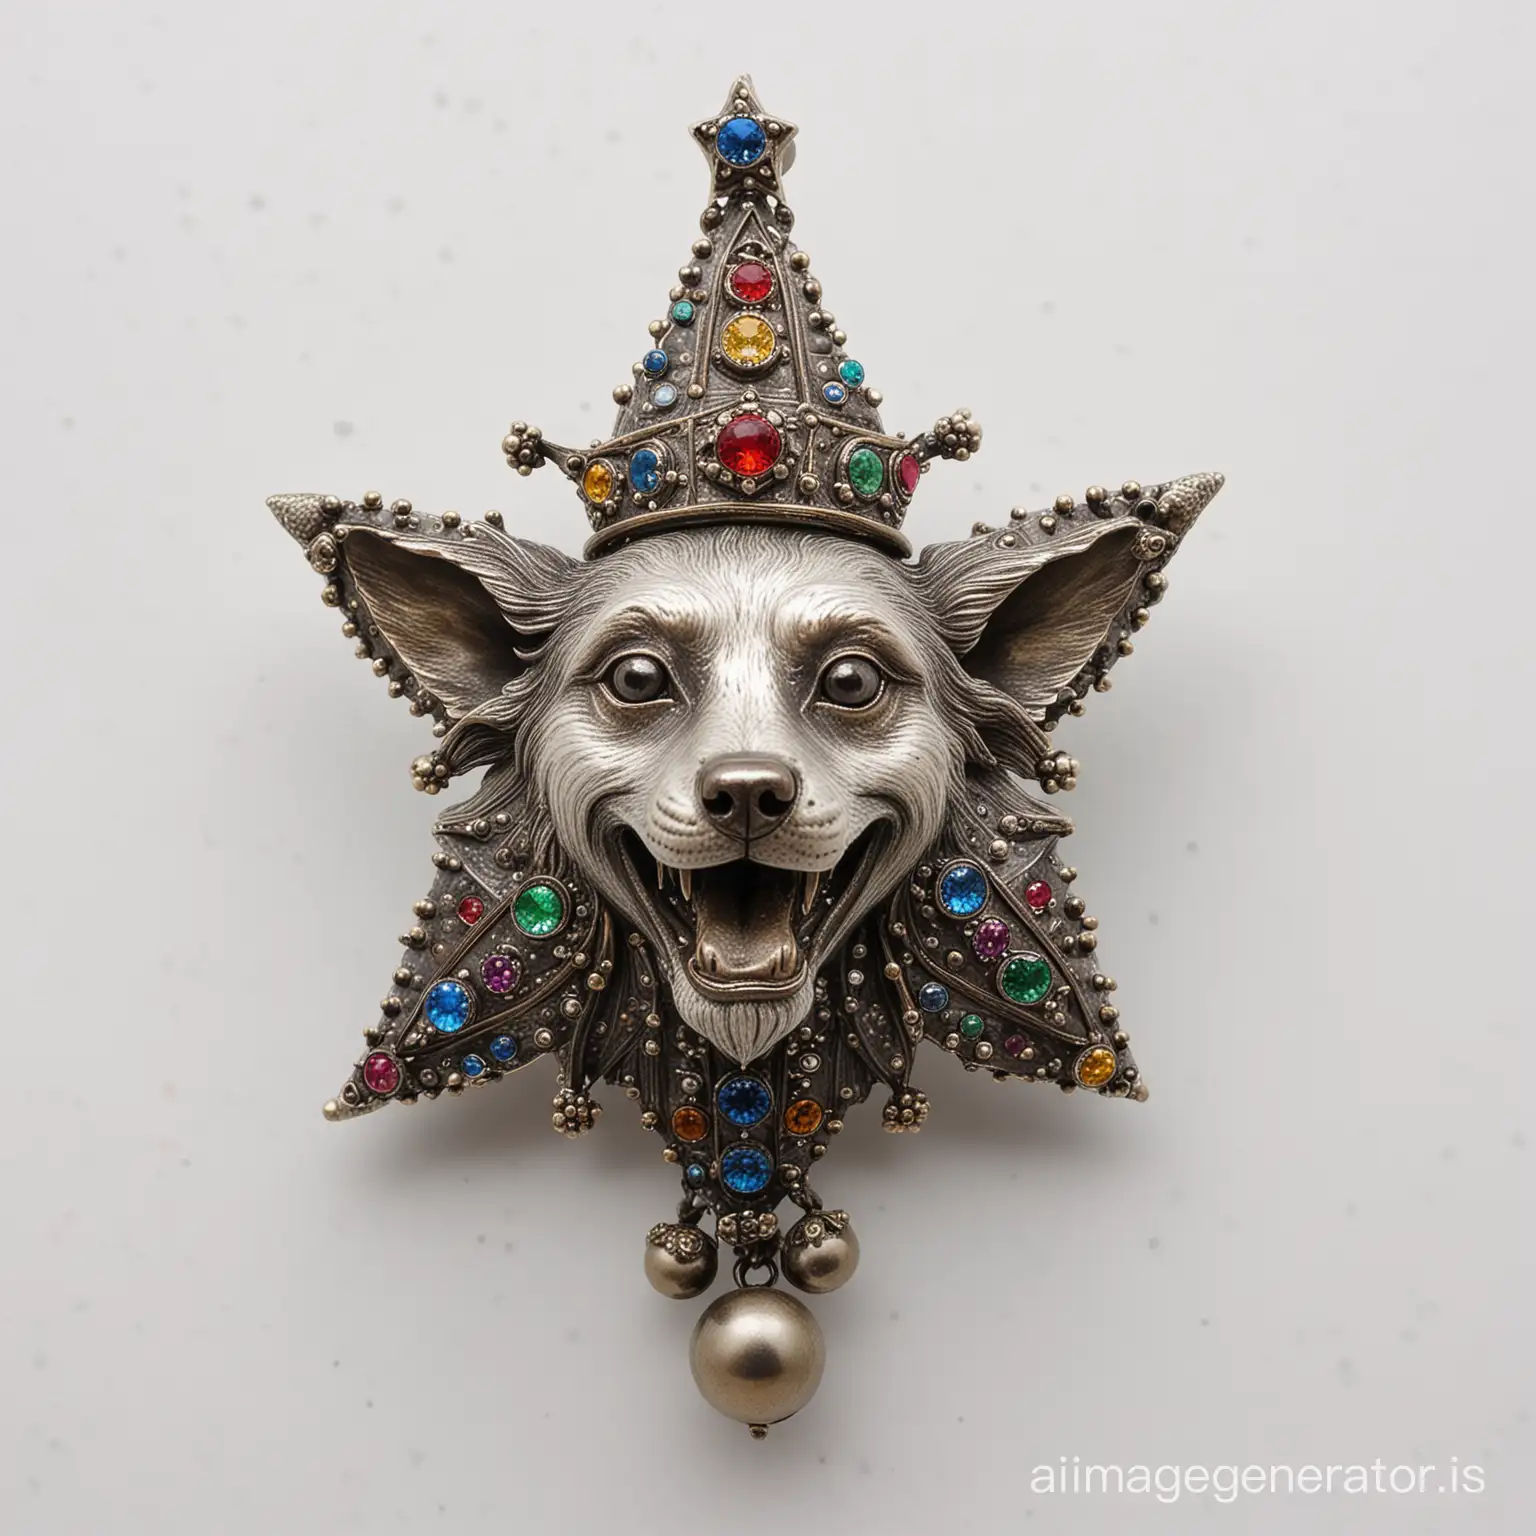 Medieval-Crazy-Dog-Jester-Brooch-with-Royal-Jewels-on-White-Background